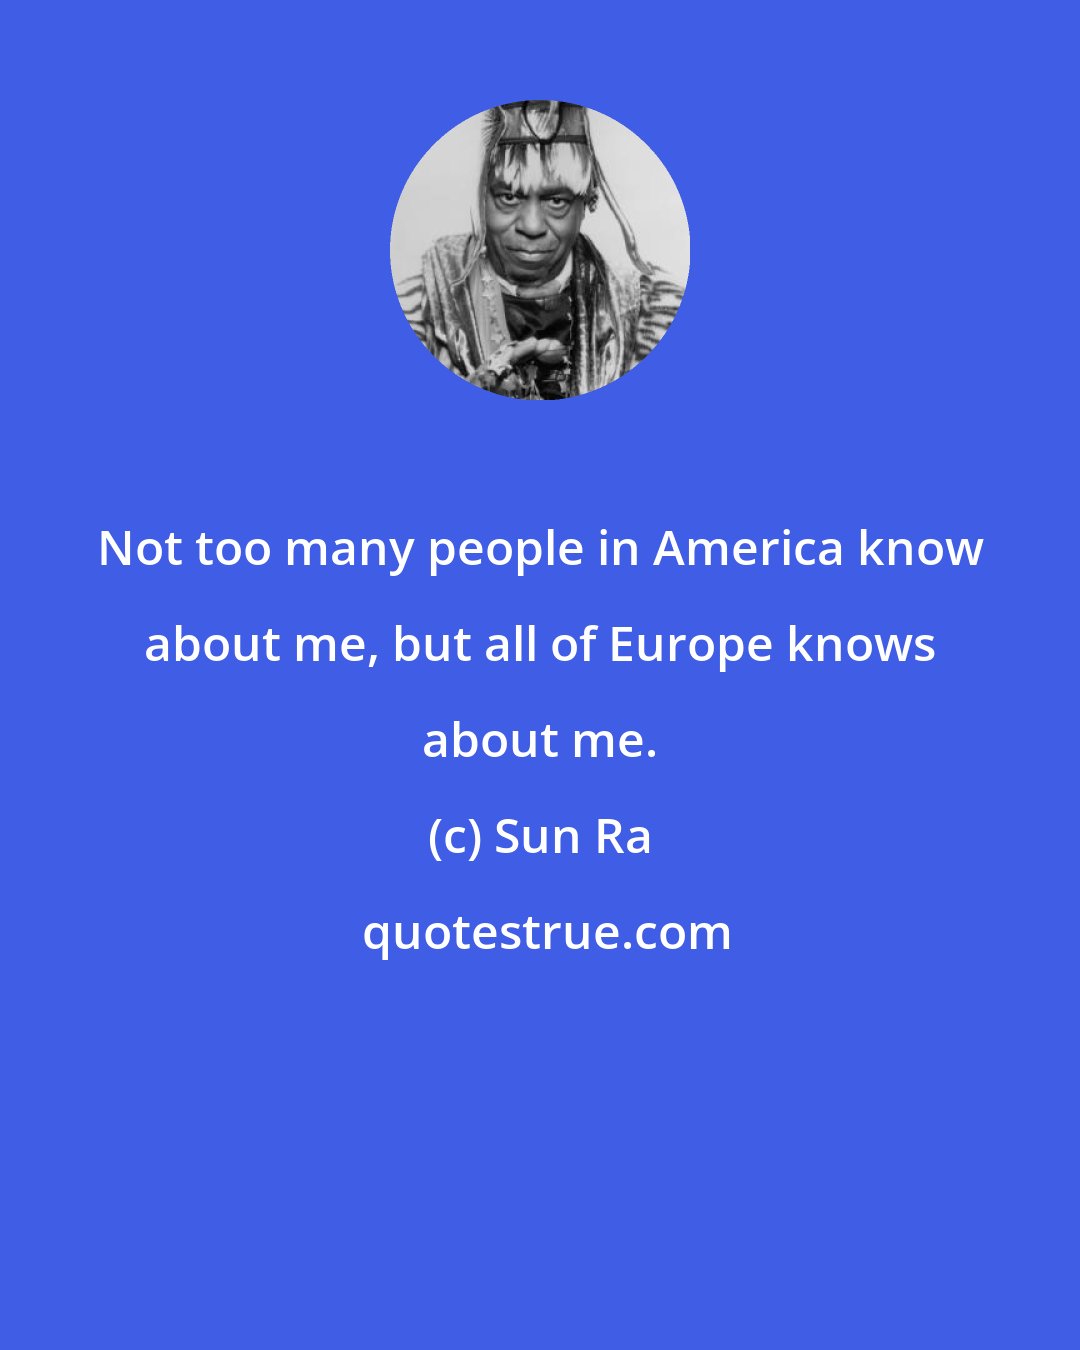 Sun Ra: Not too many people in America know about me, but all of Europe knows about me.